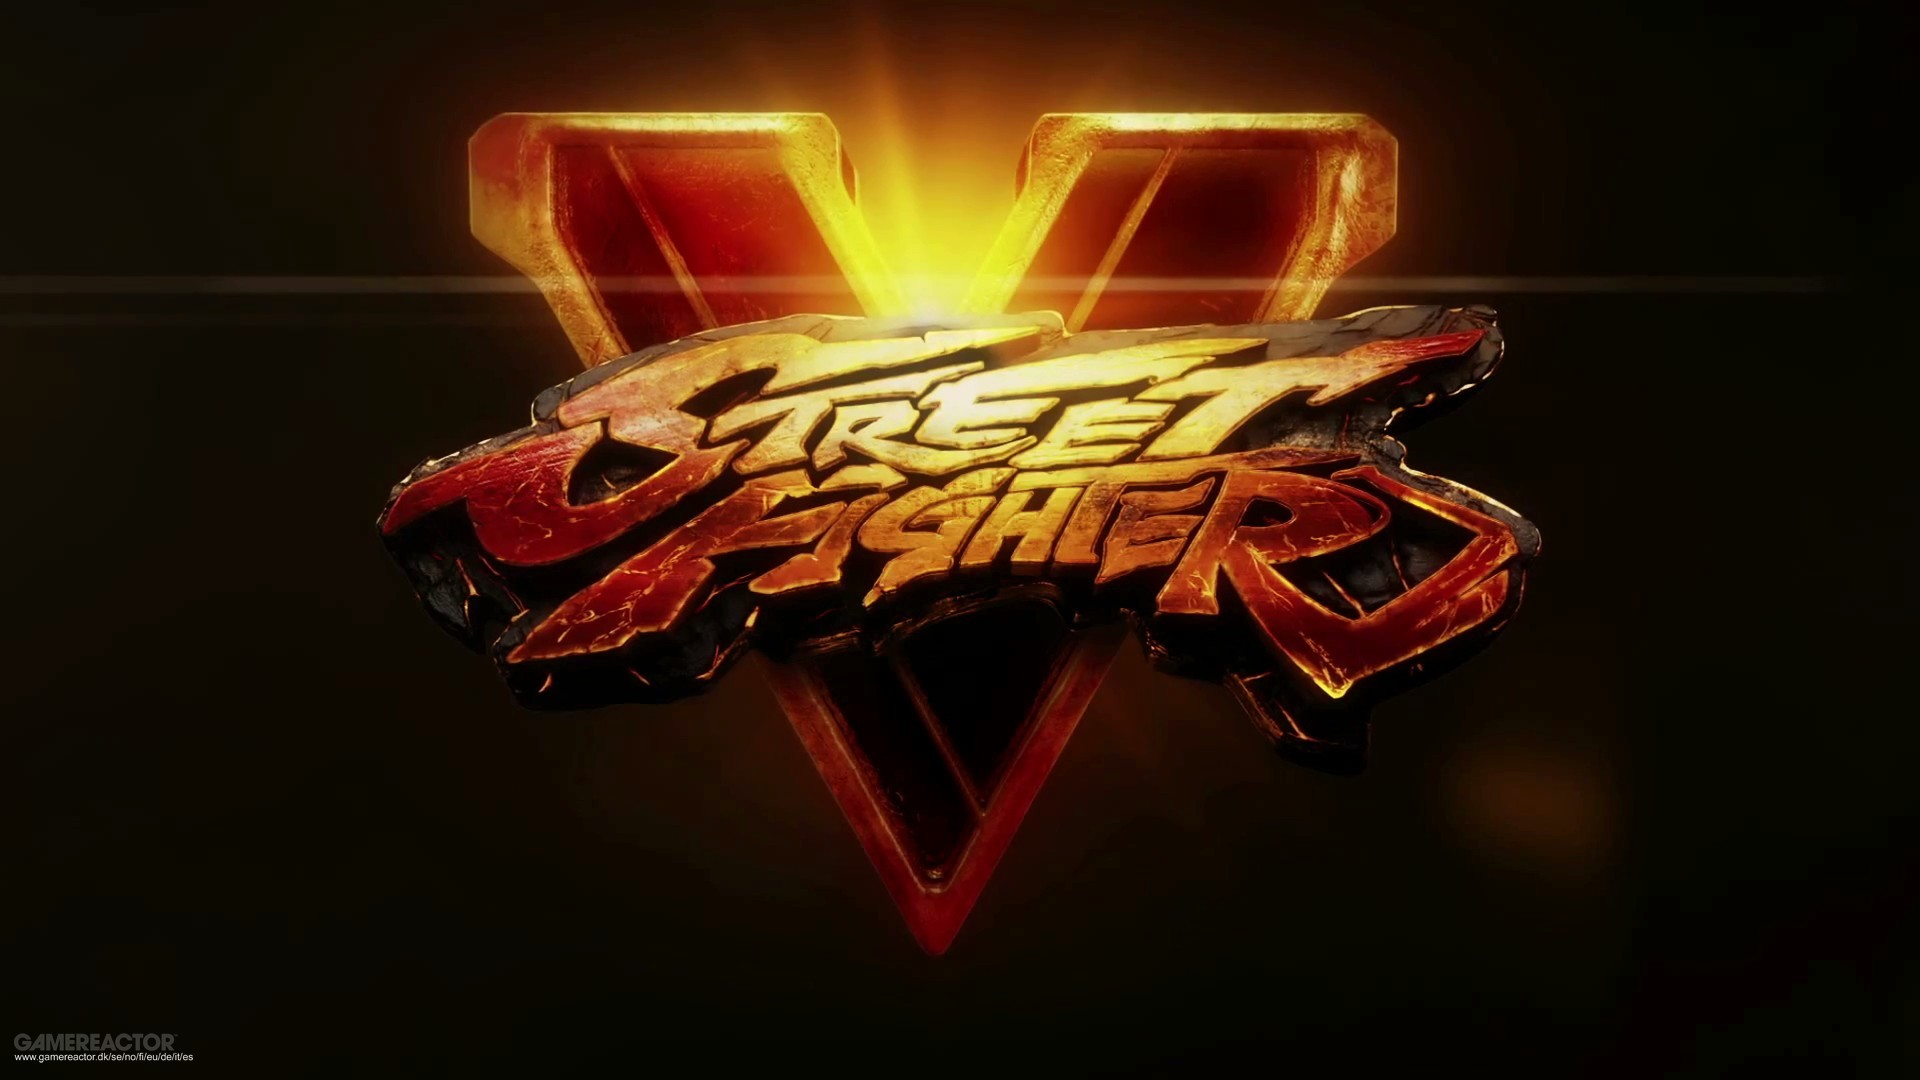 Street Fighter 5 Wallpaper ① Download Free Stunning Wallpapers For